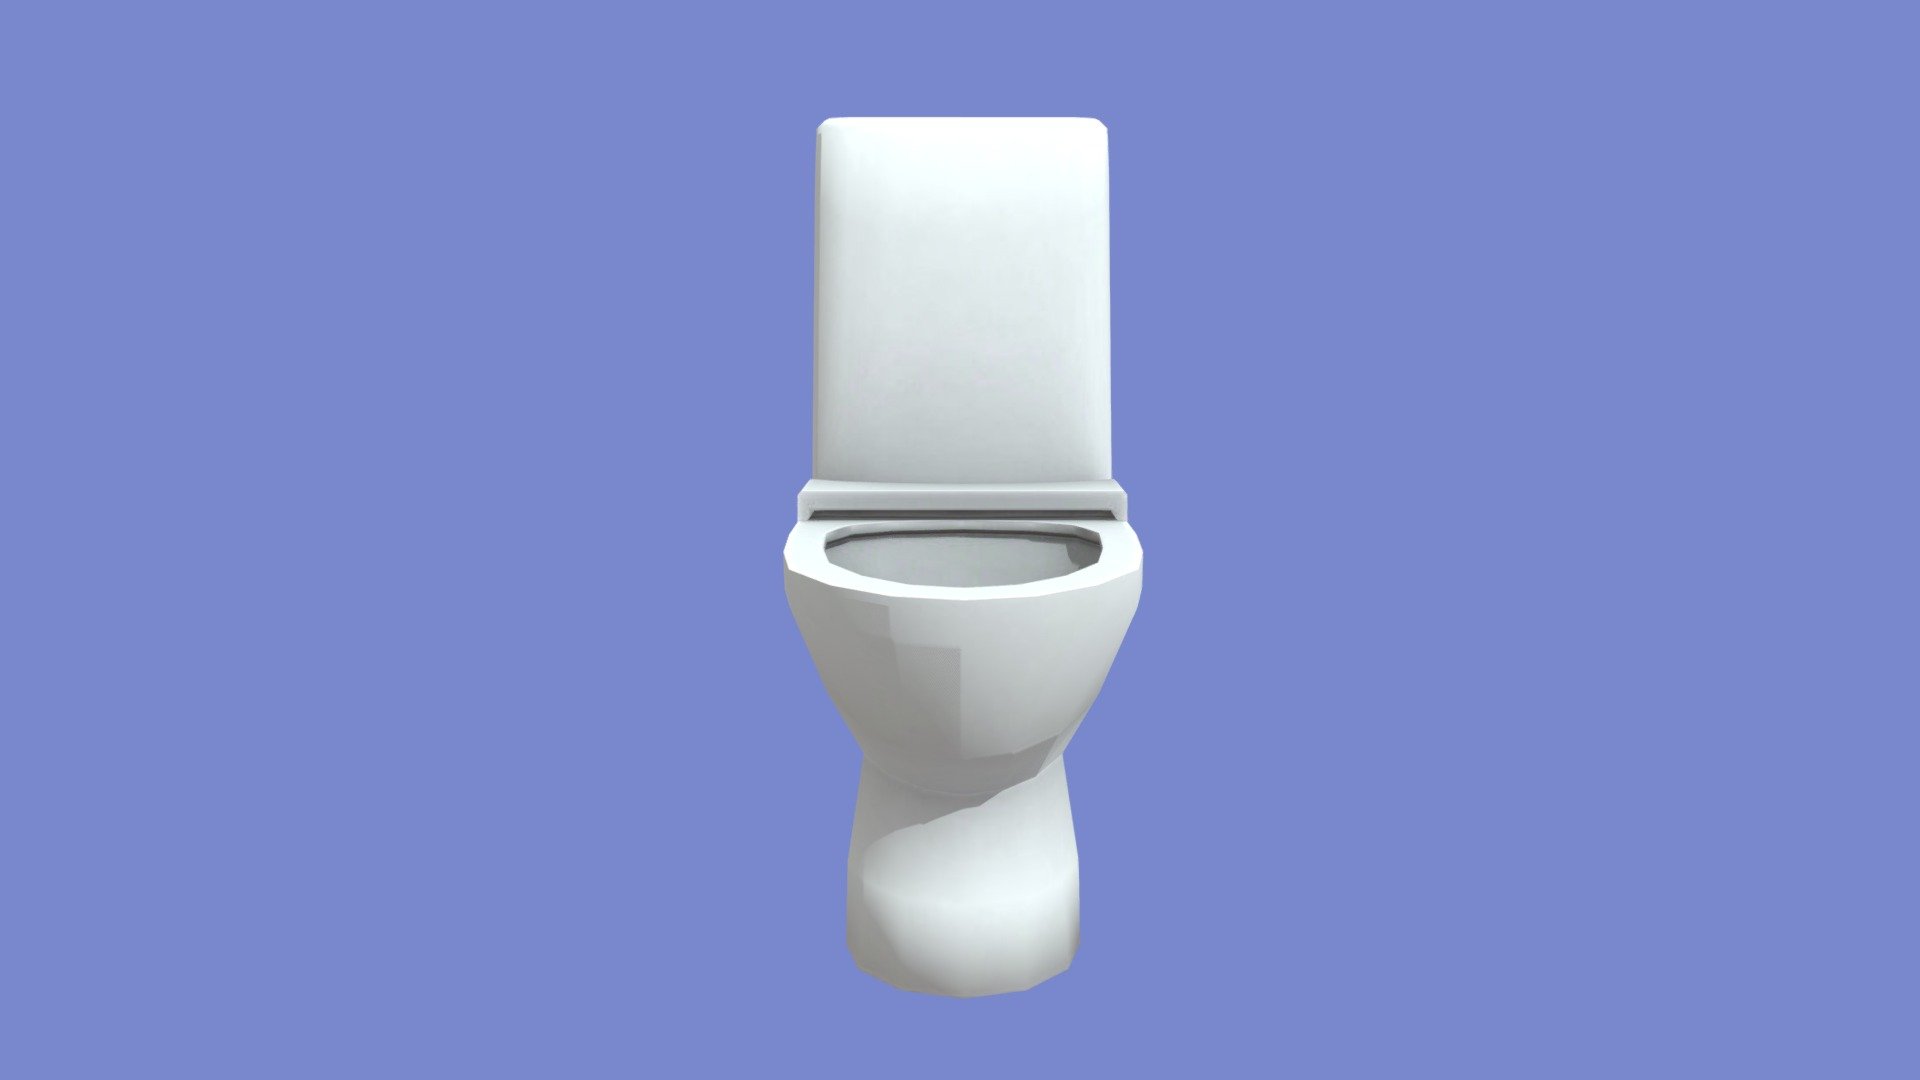 boss toilet

haha no download for you 😈 - g-man skibidi toilet model - 3D model by Lil Baby (@imlilbaby2) 3d model